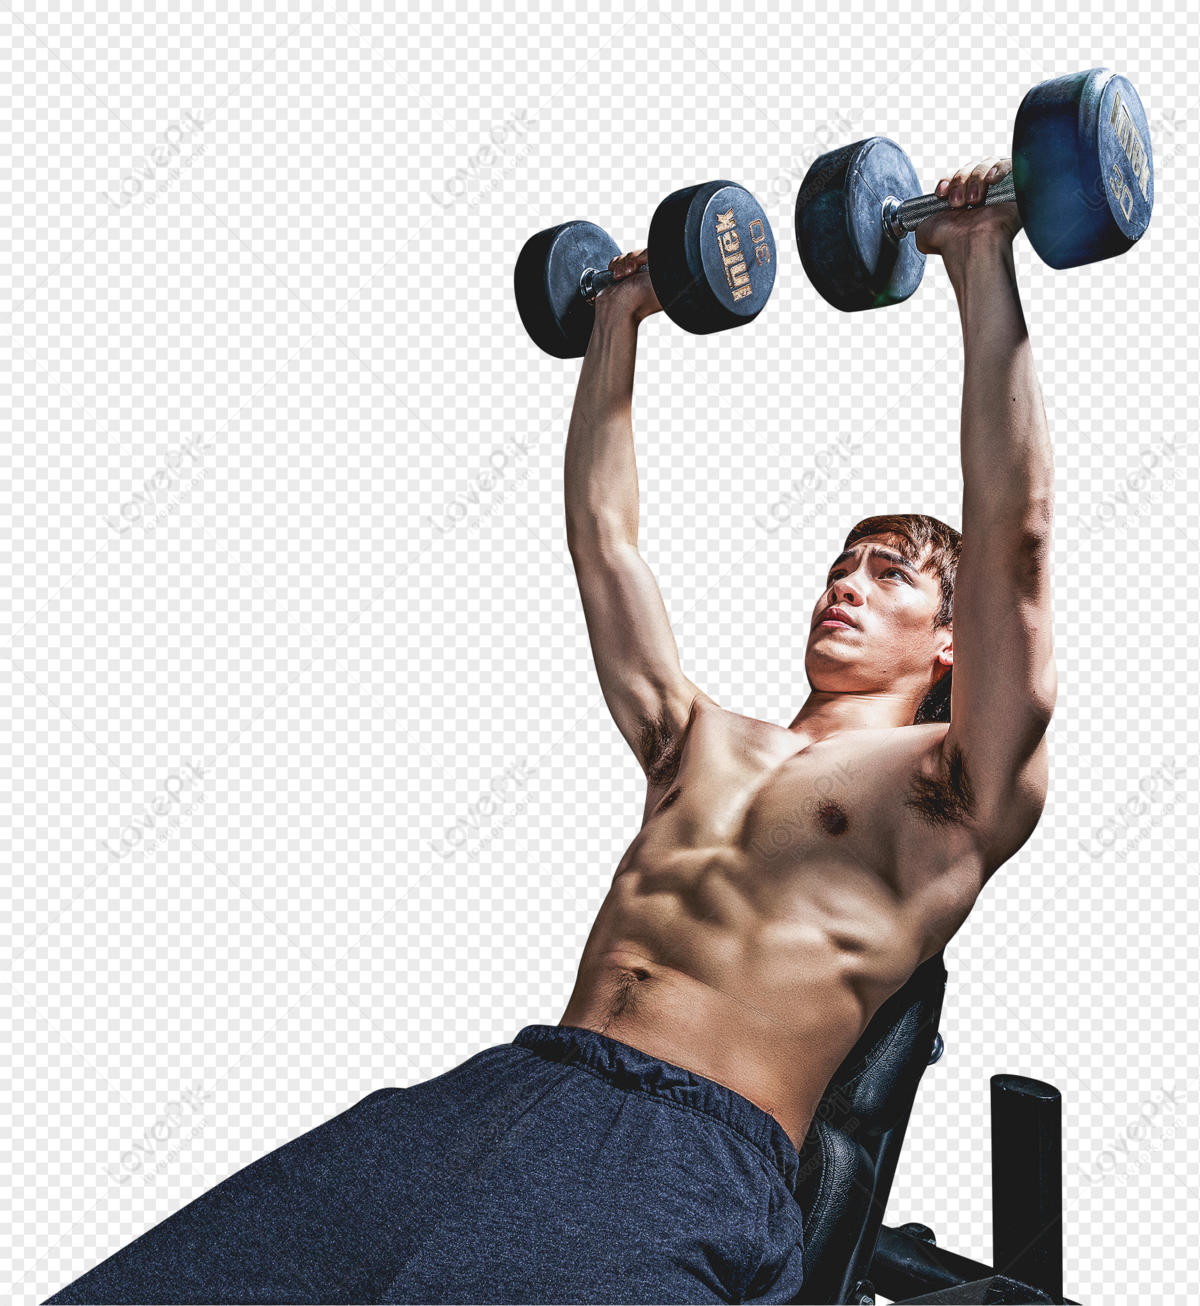 Gym Strong Man Dumbbell Movement PNG Transparent Image And Clipart Image  For Free Download - Lovepik | 400336677